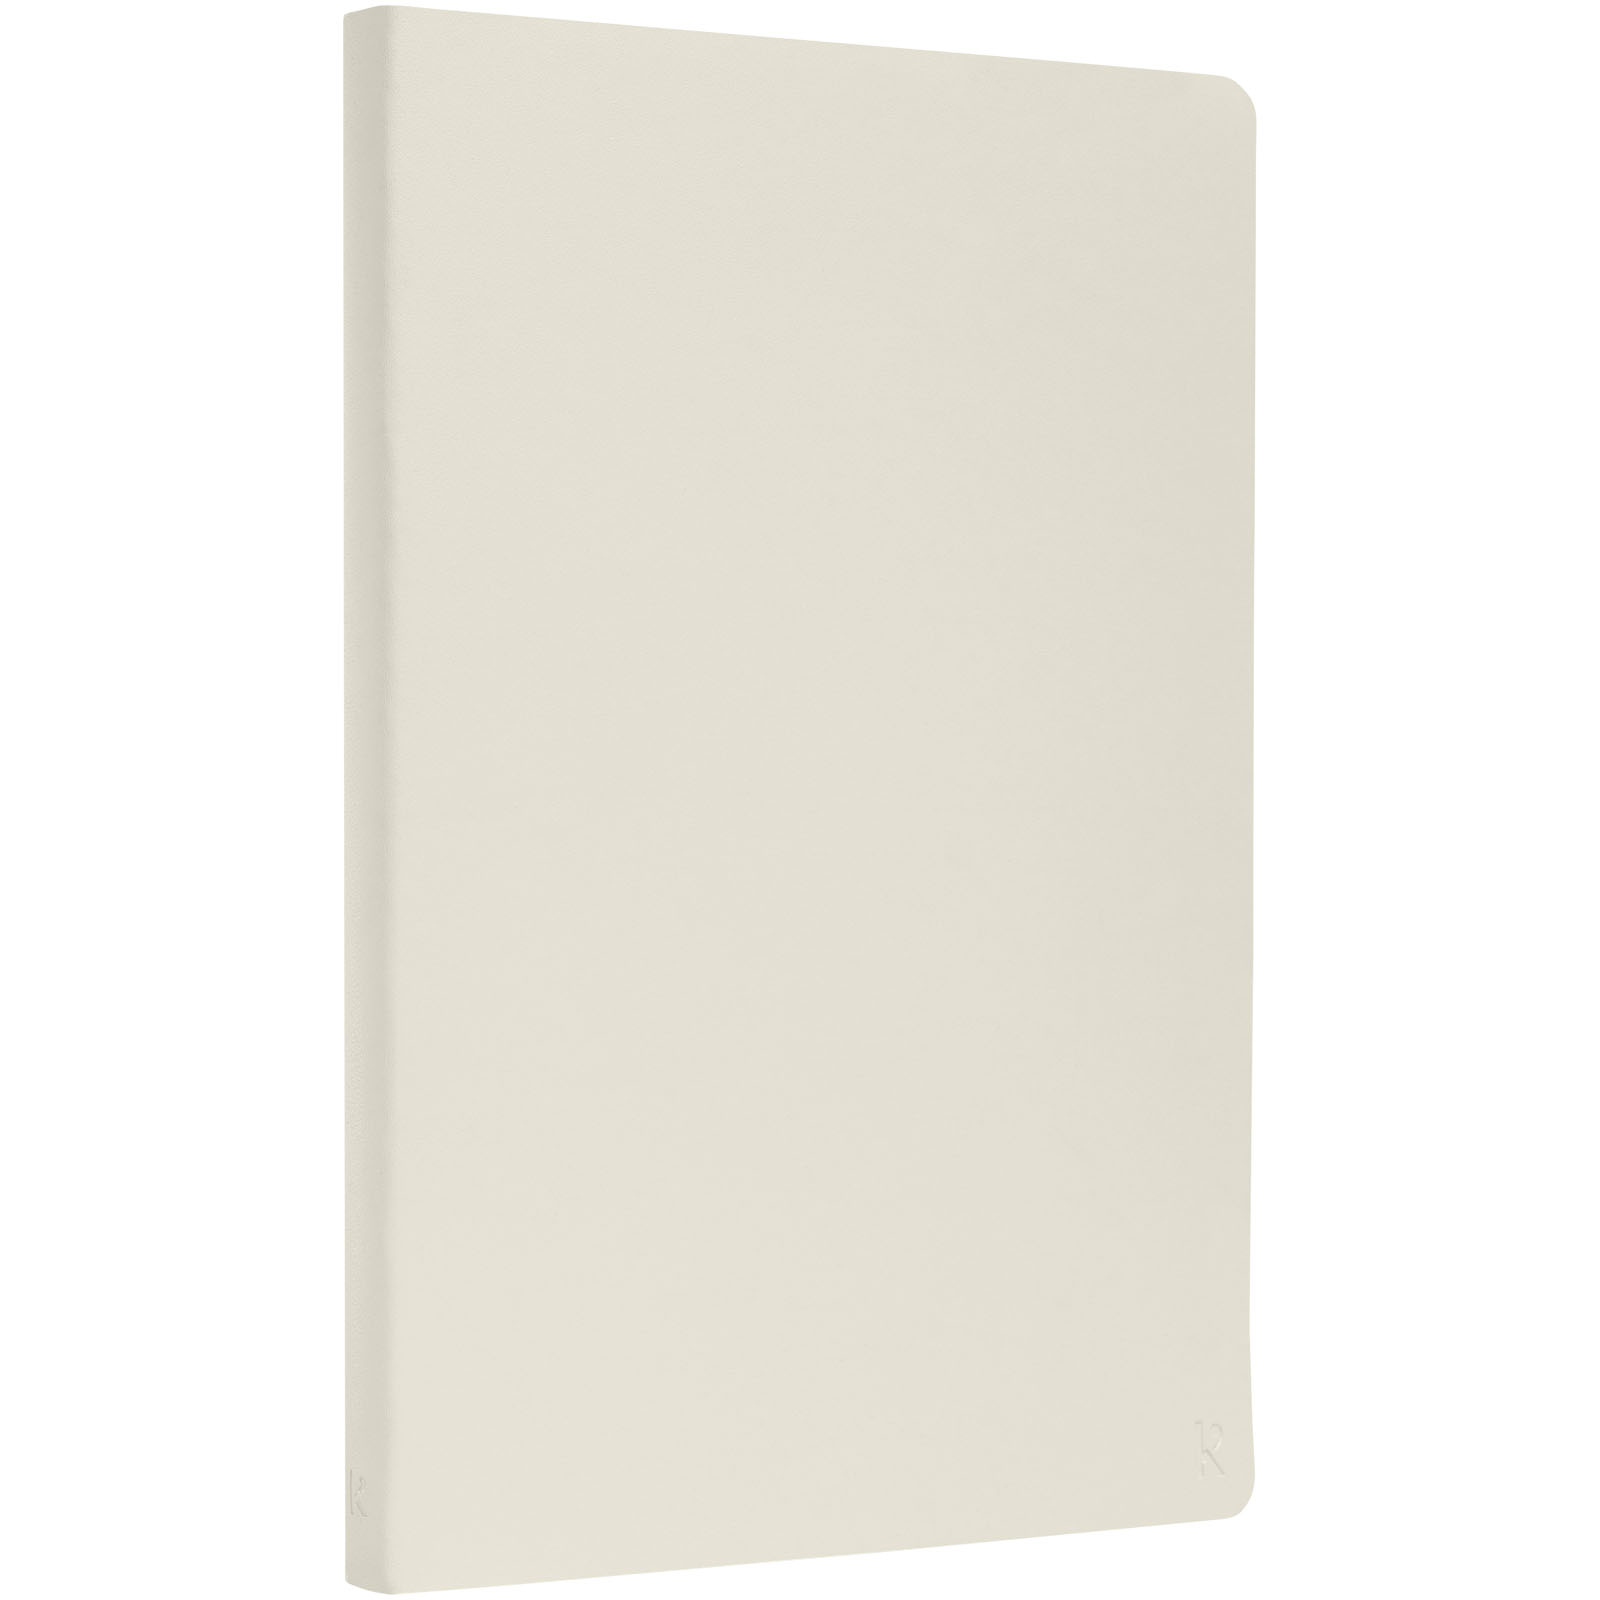 Soft cover notebooks - Karst® A5 softcover notebook - lined